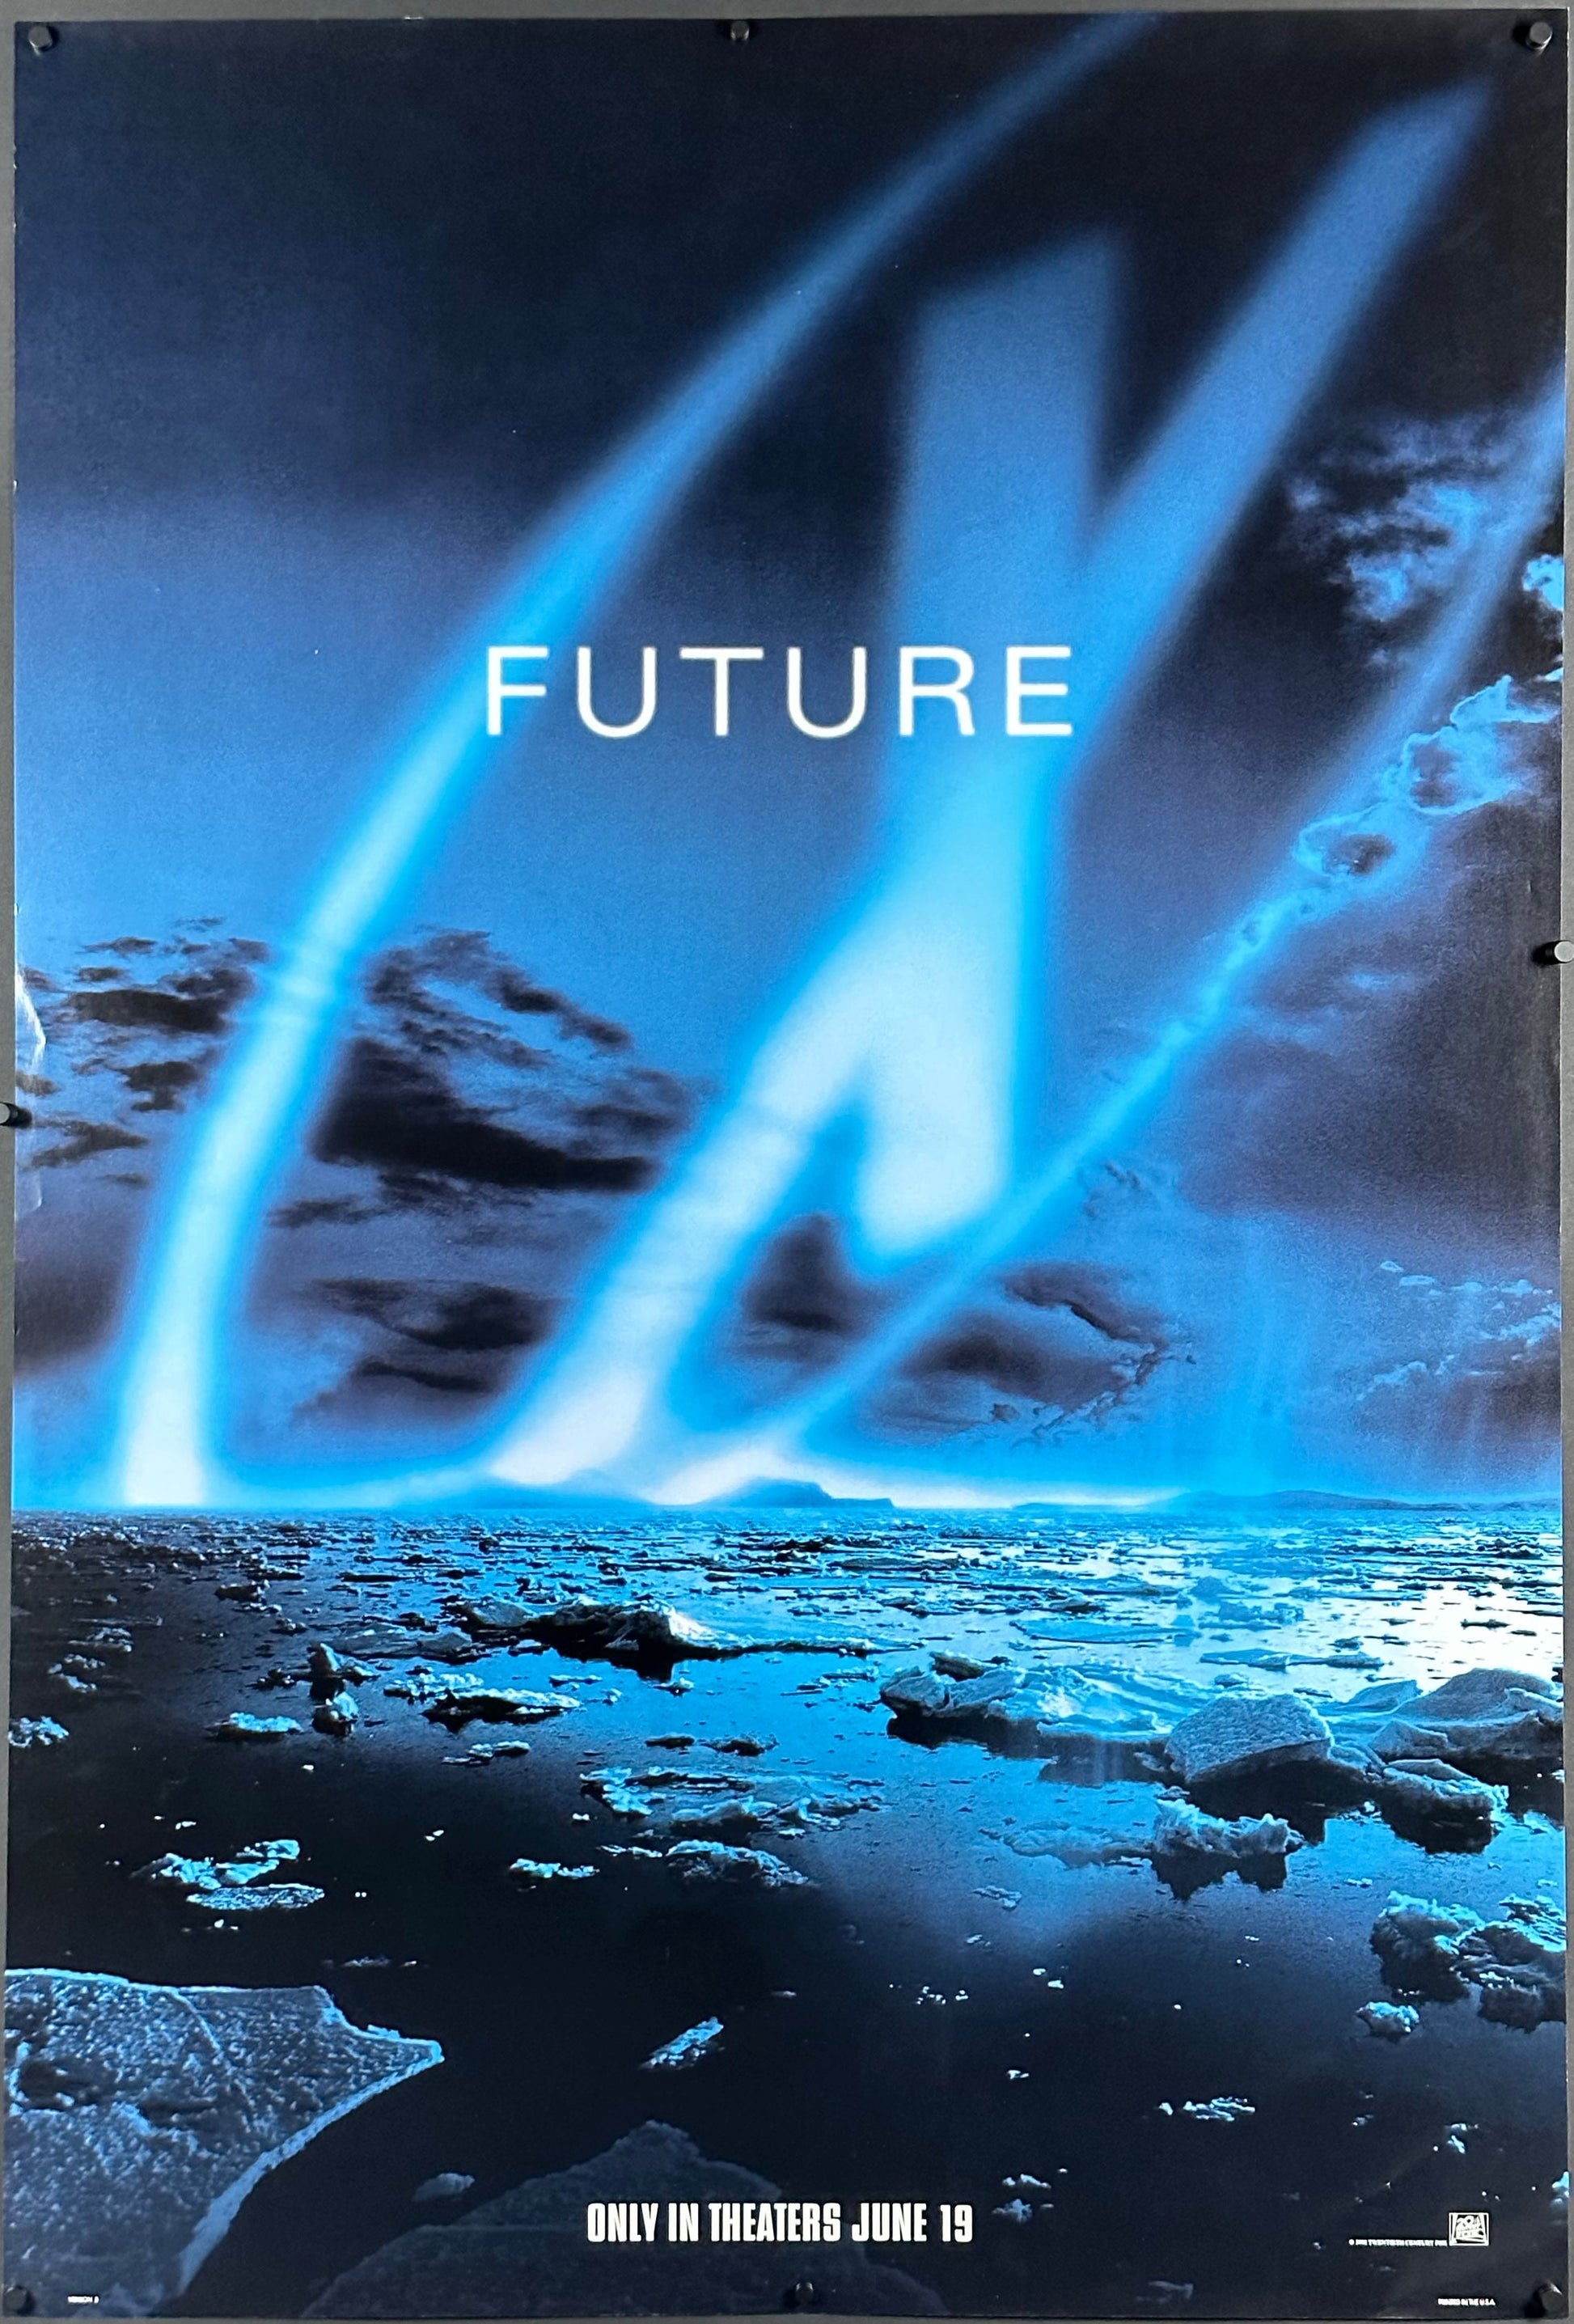 The X-Files US One Sheet "Future" Style (1998) - ORIGINAL RELEASE - posterpalace.com